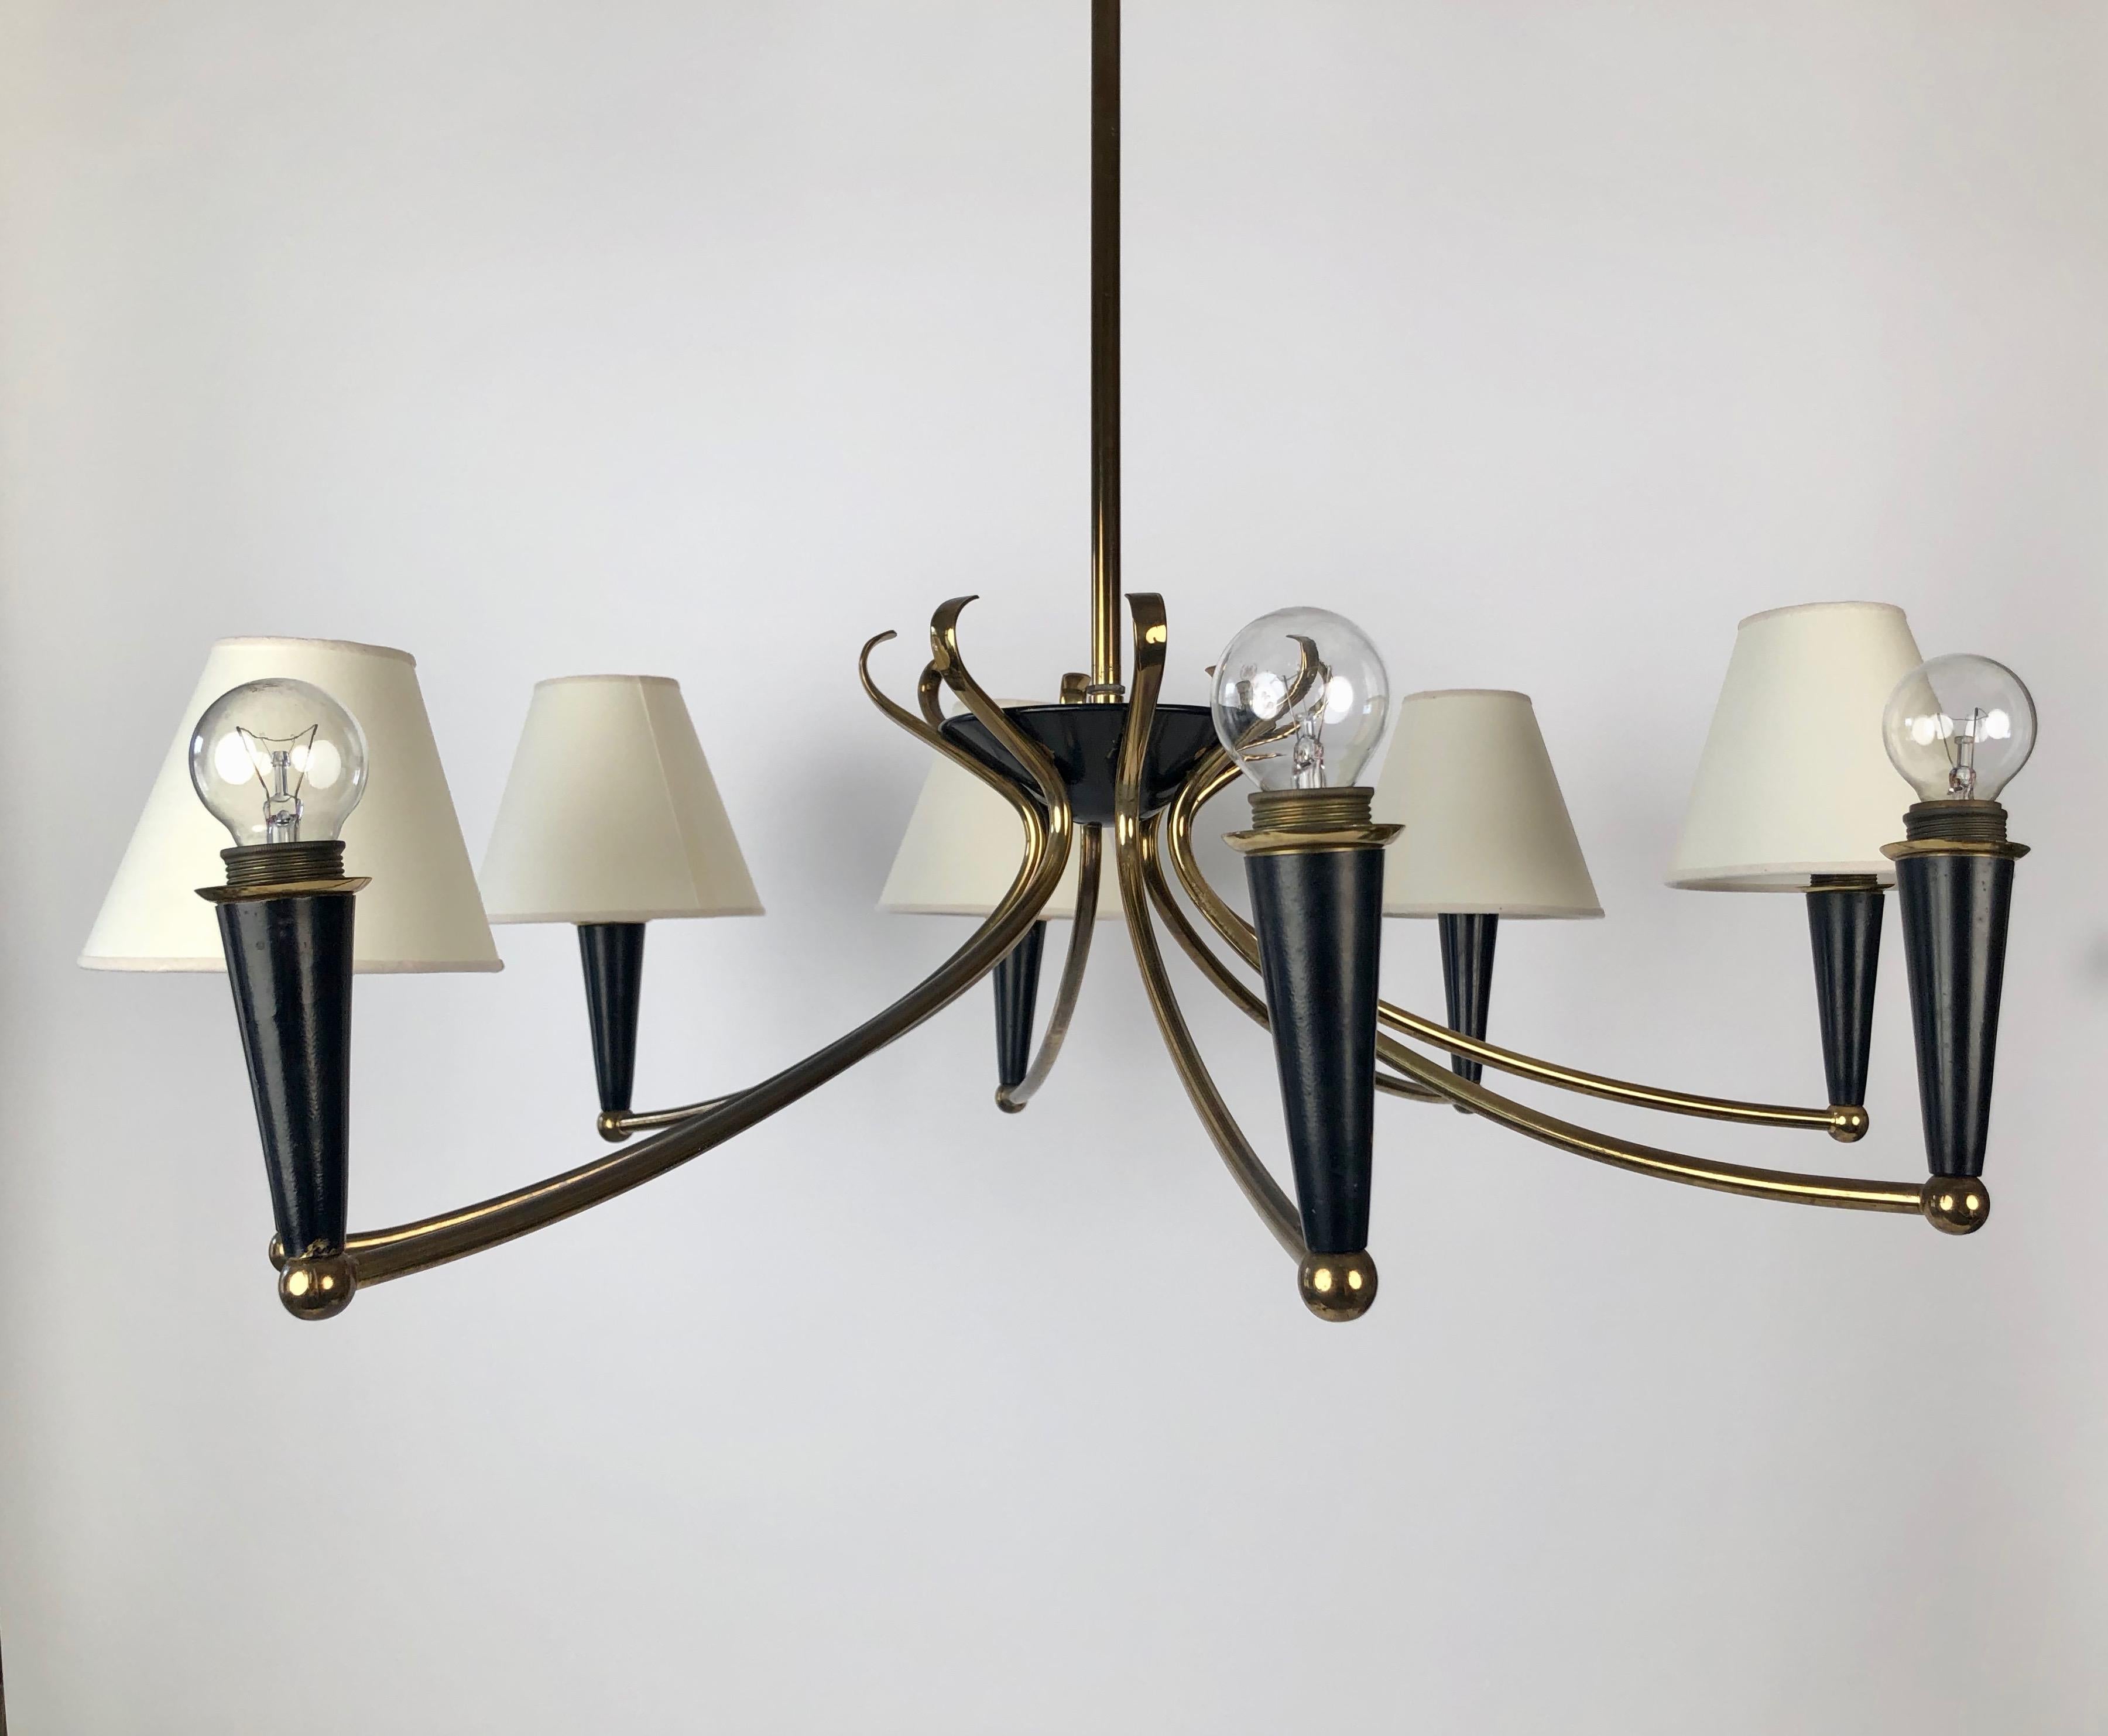 Austrian Modern Eight Arm Chandelier from Austria with Parchment Shades, 1950's For Sale